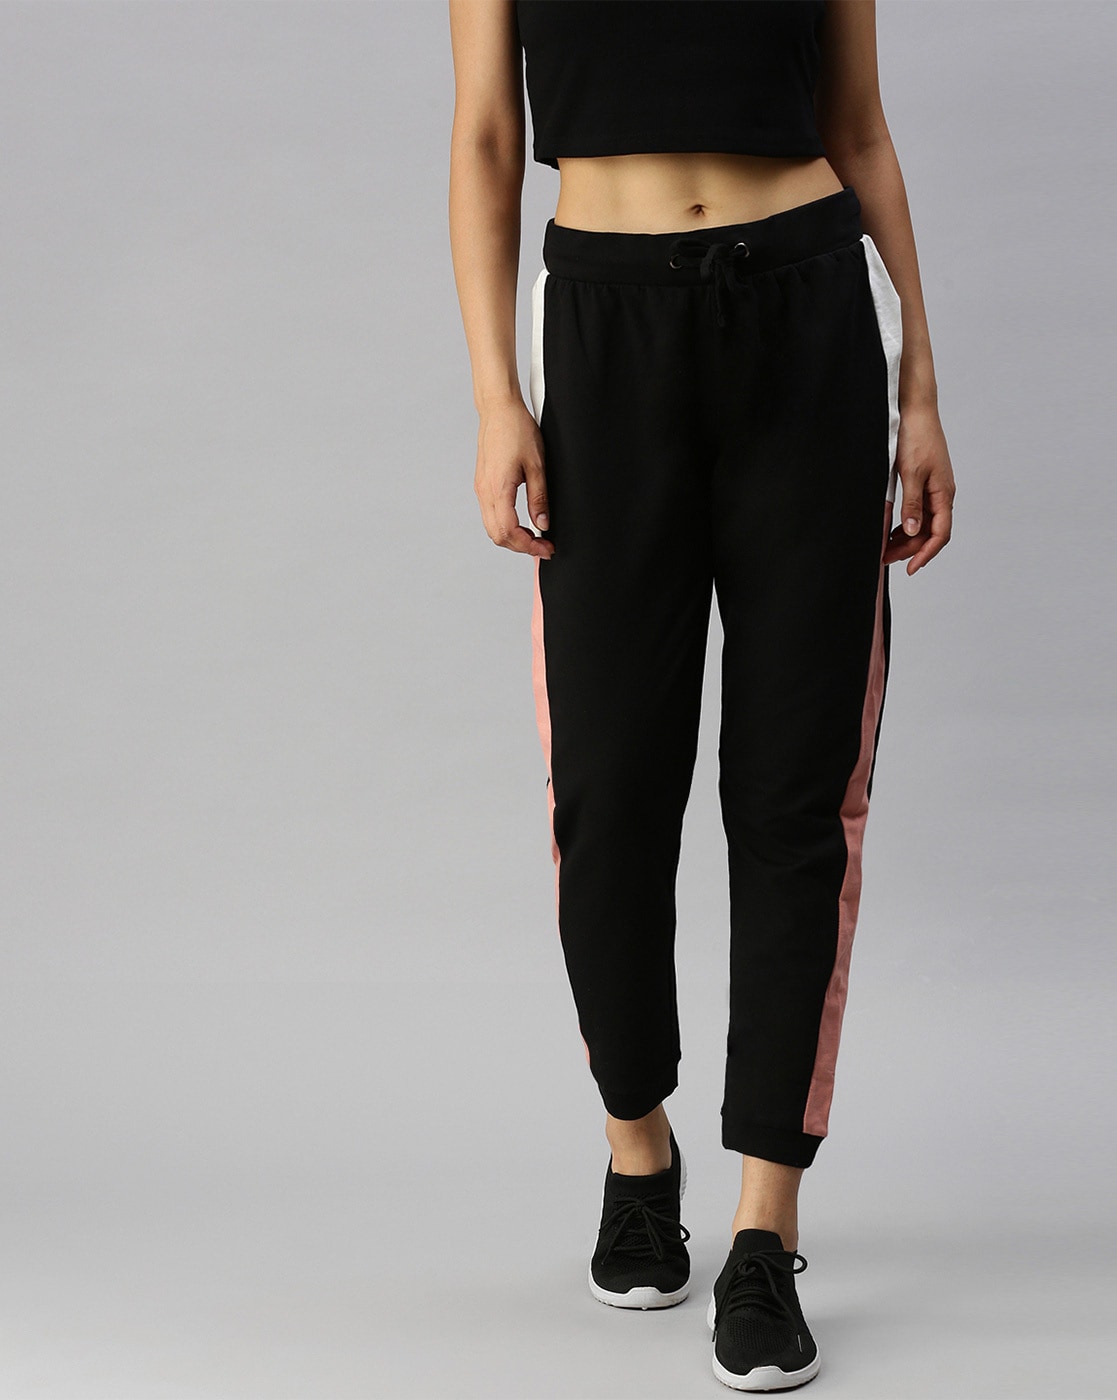 Striped Track Pants  Buy Striped Track Pants online in India